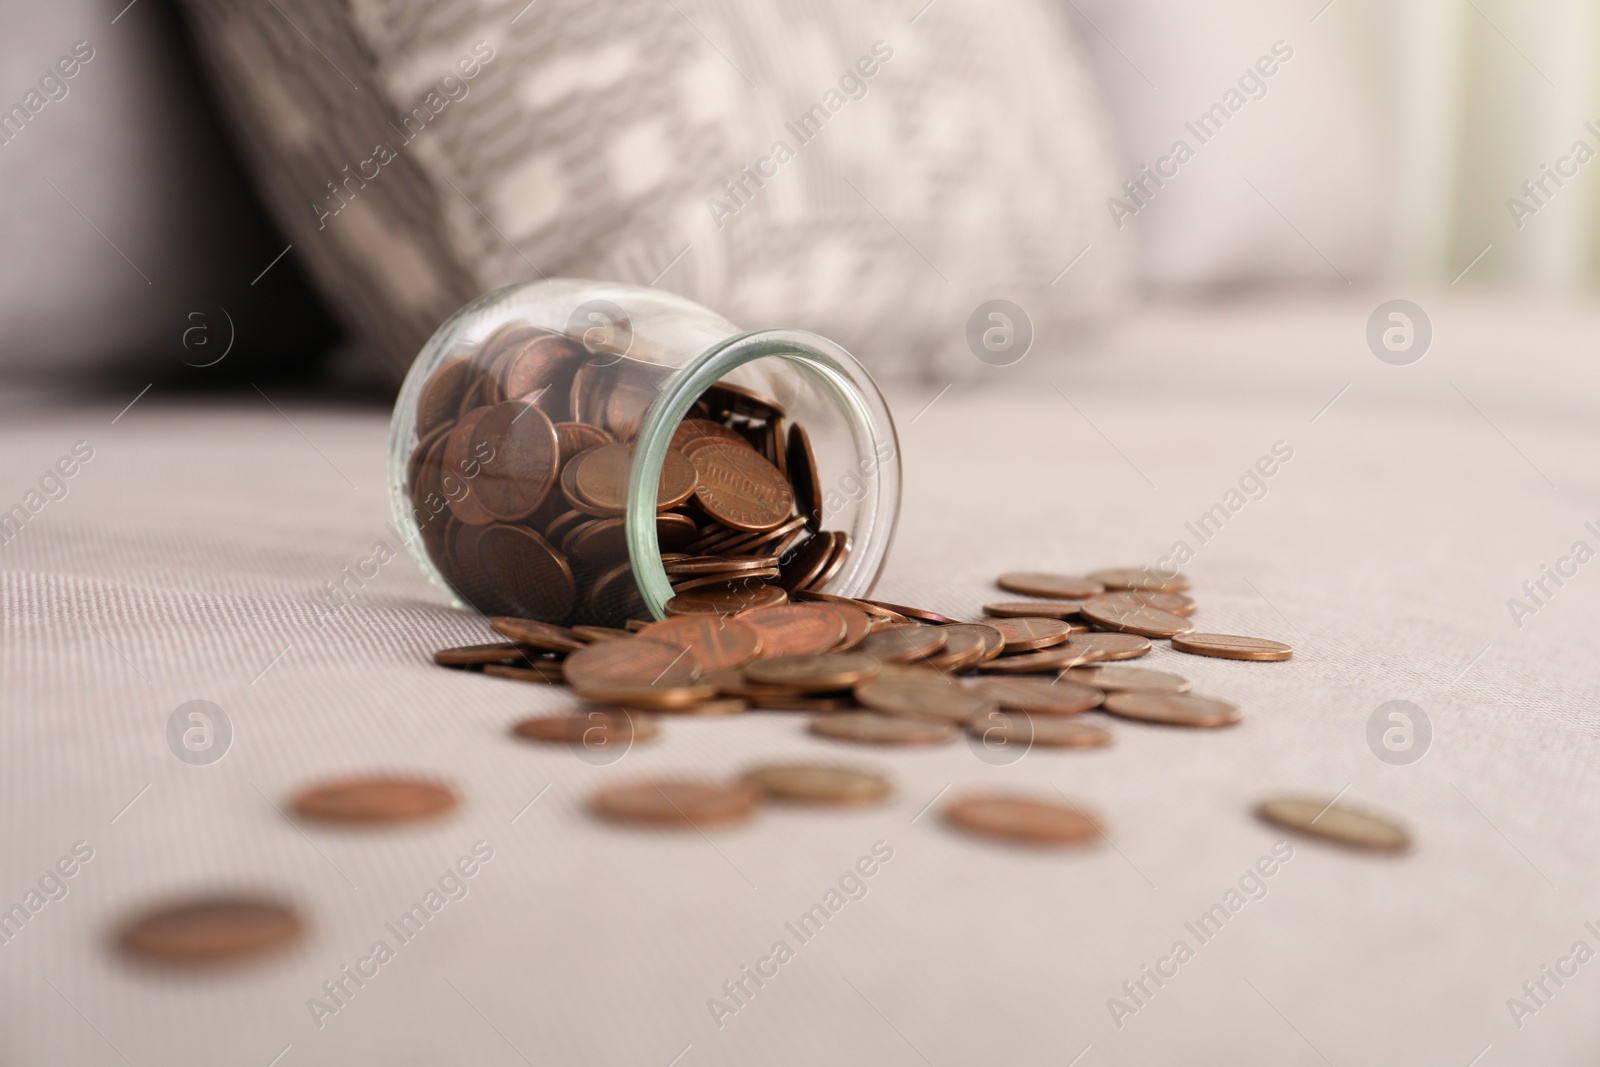 Photo of Overturned glass jar with coins on grey sofa